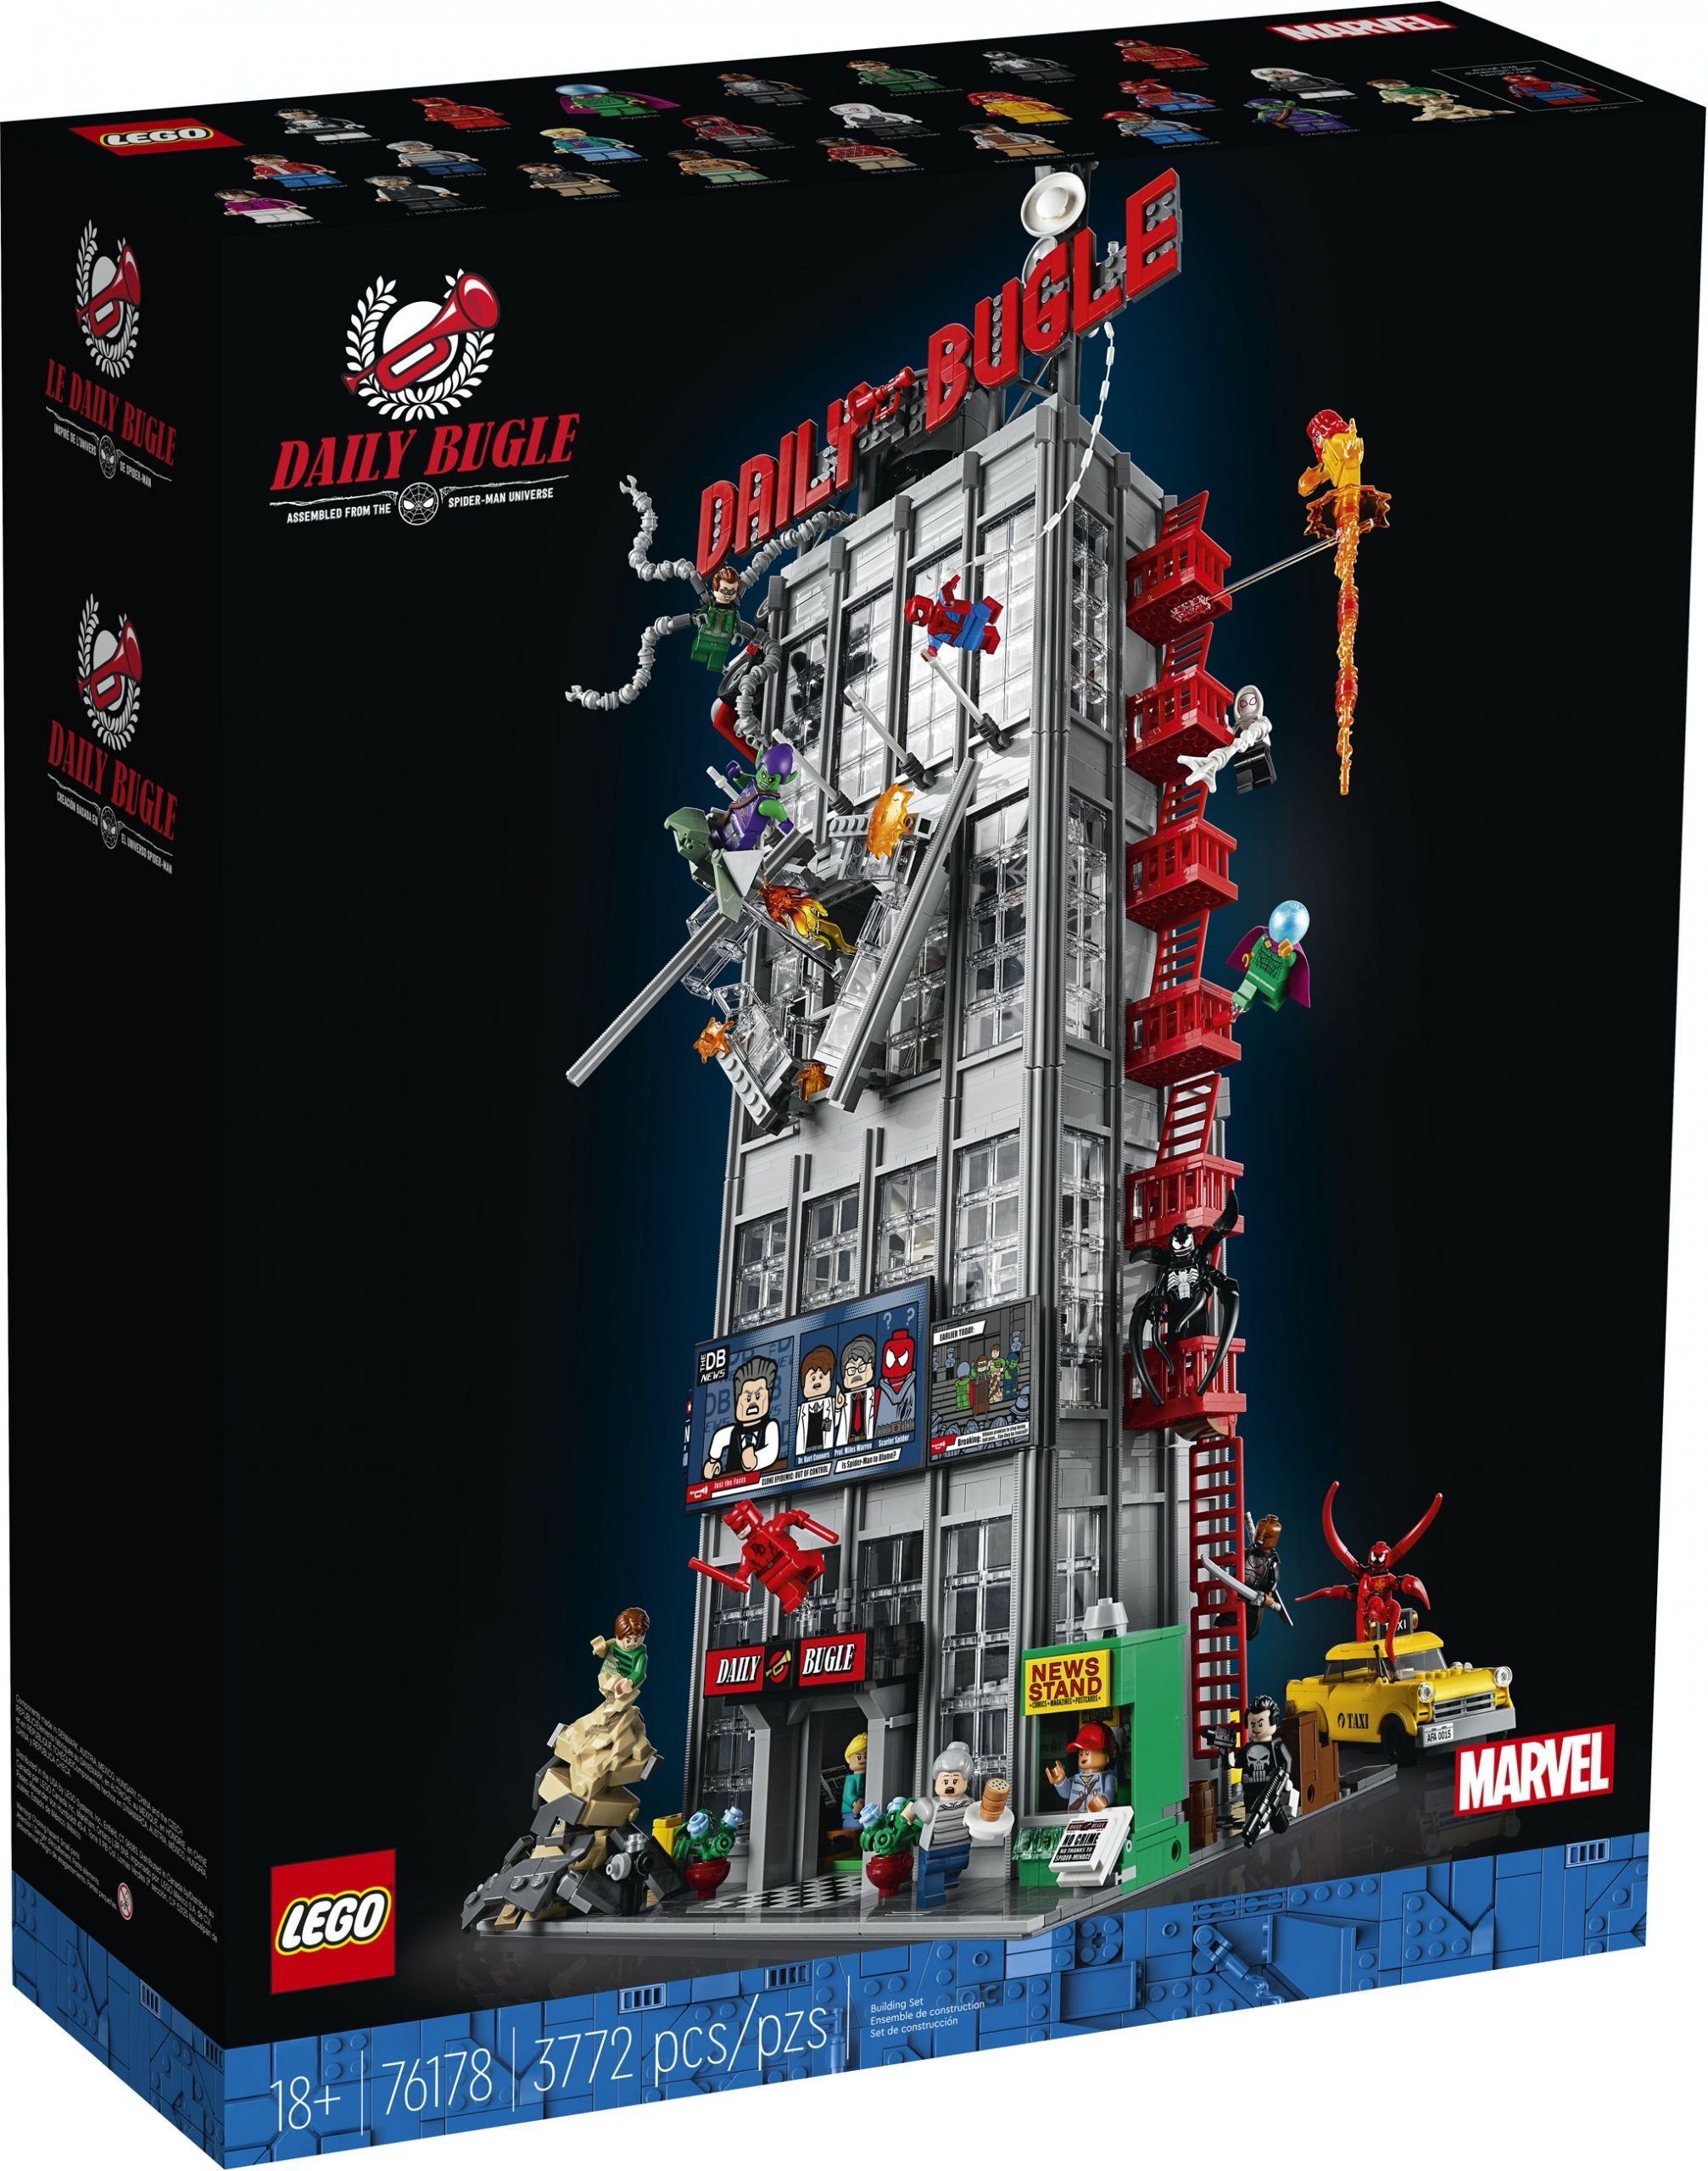 lego-marvel-super-heroes-daily-bugle-box-front